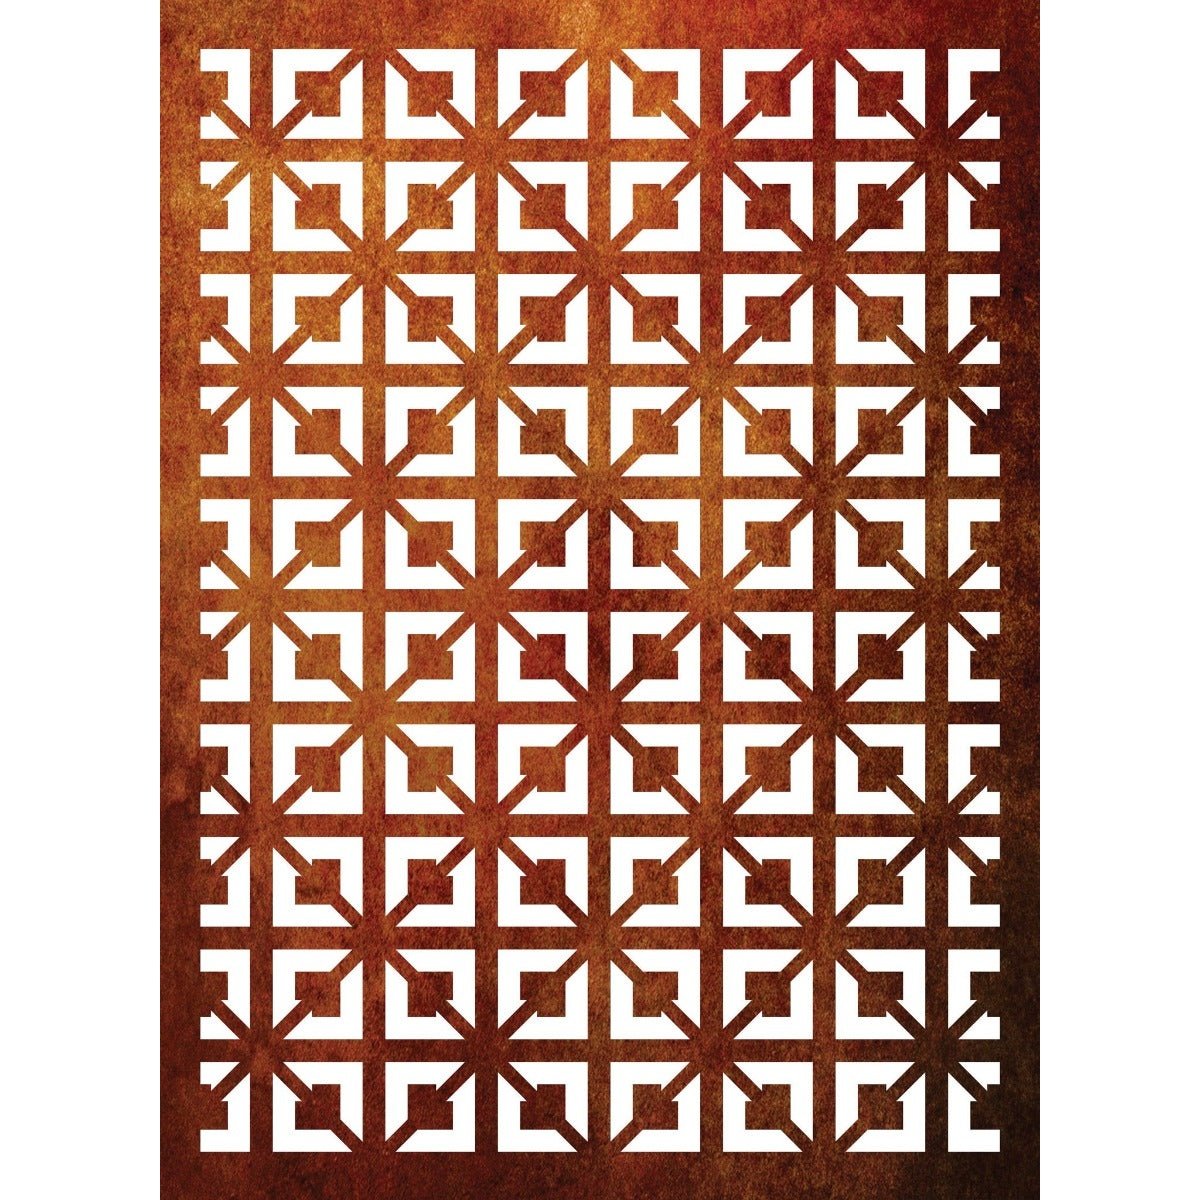 Privacy Screen & Fence Panel - Arrows